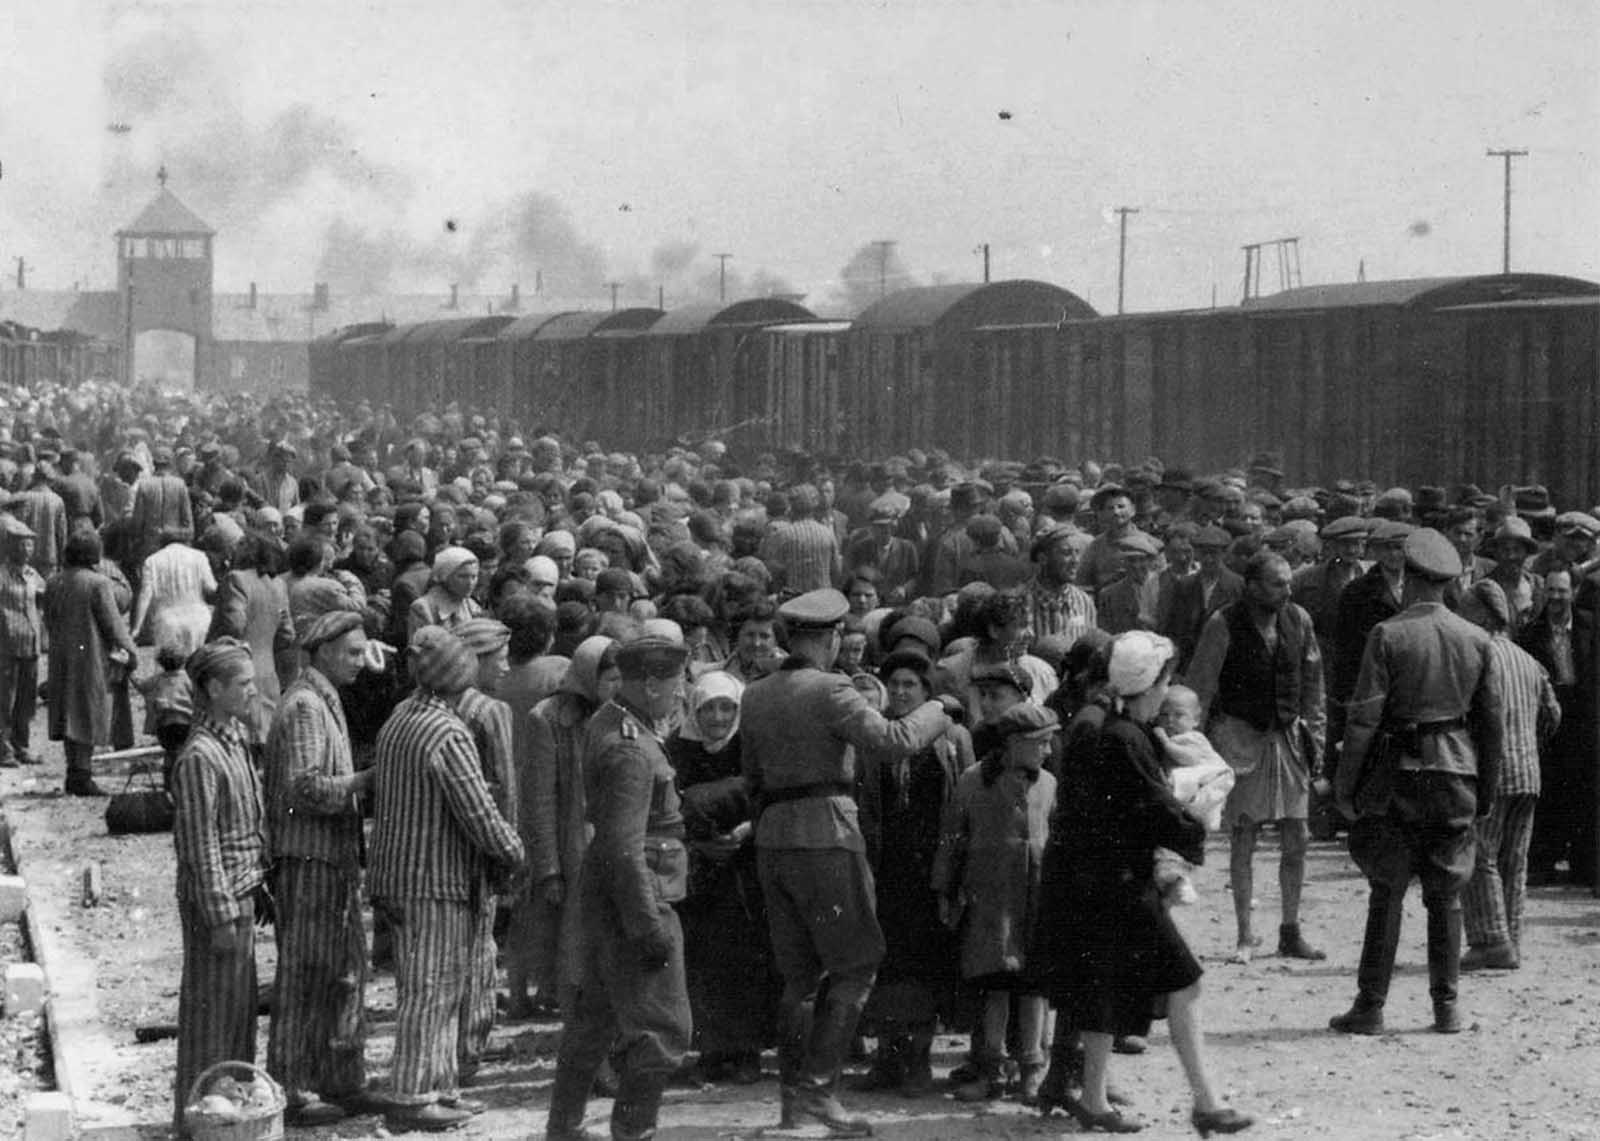 The arrival and processing of an entire transport of Jews from Carpatho-Ruthenia, a region annexed in 1939 to Hungary from Czechoslovakia, at Auschwitz-Birkenau extermination camp in Poland, in May of 1944. The picture was donated to Yad Vashem in 1980 by Lili Jacob.